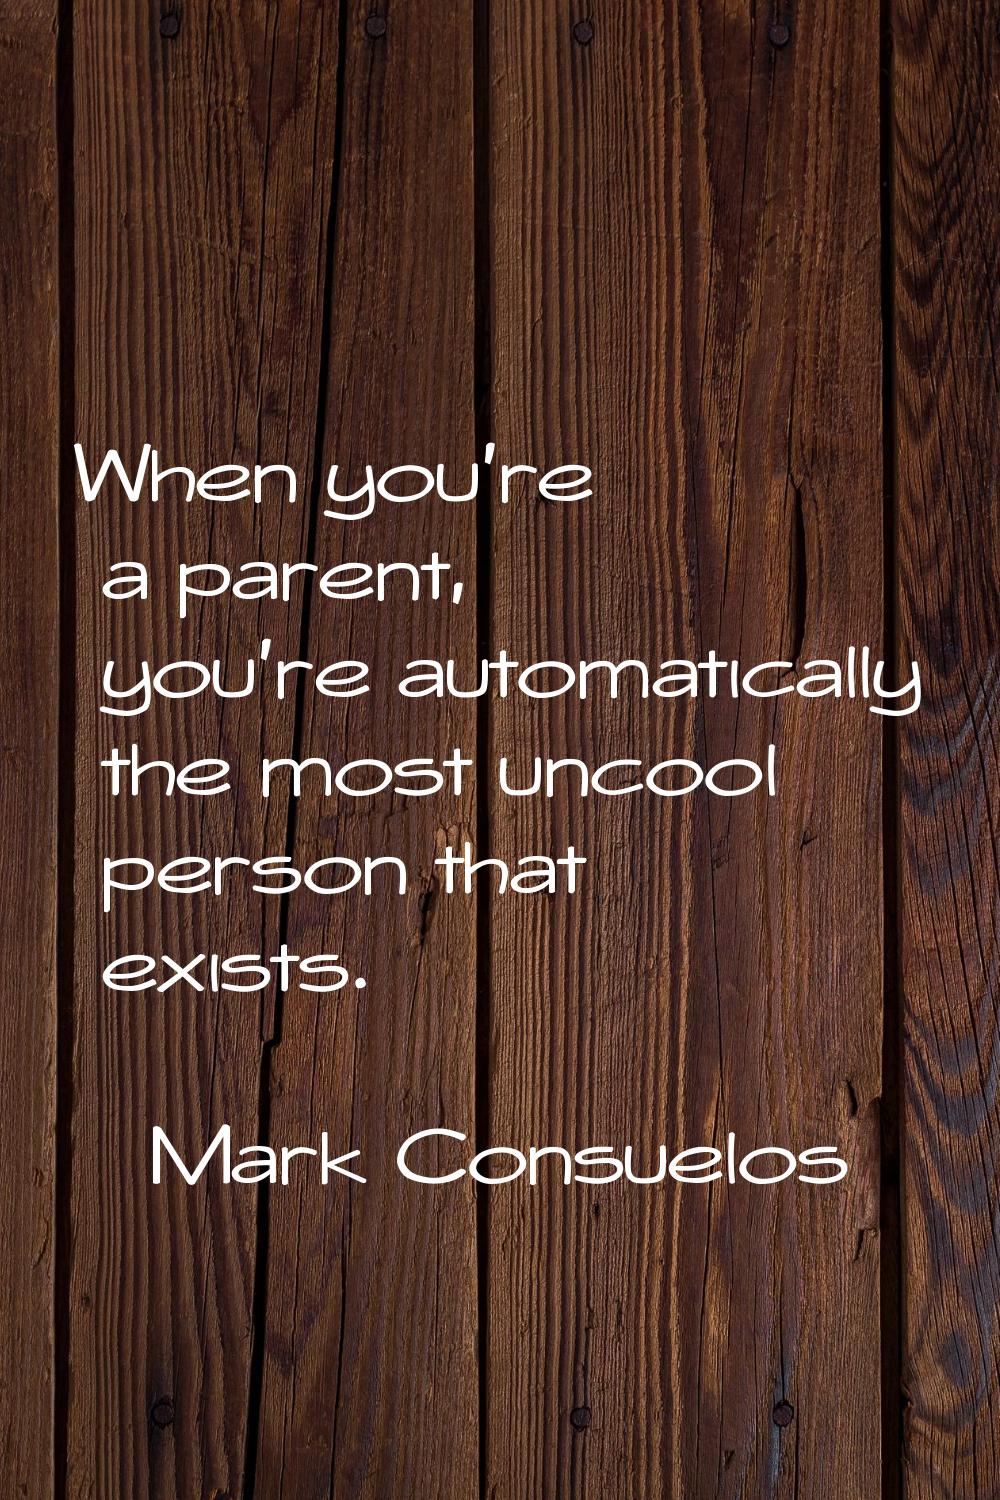 When you're a parent, you're automatically the most uncool person that exists.